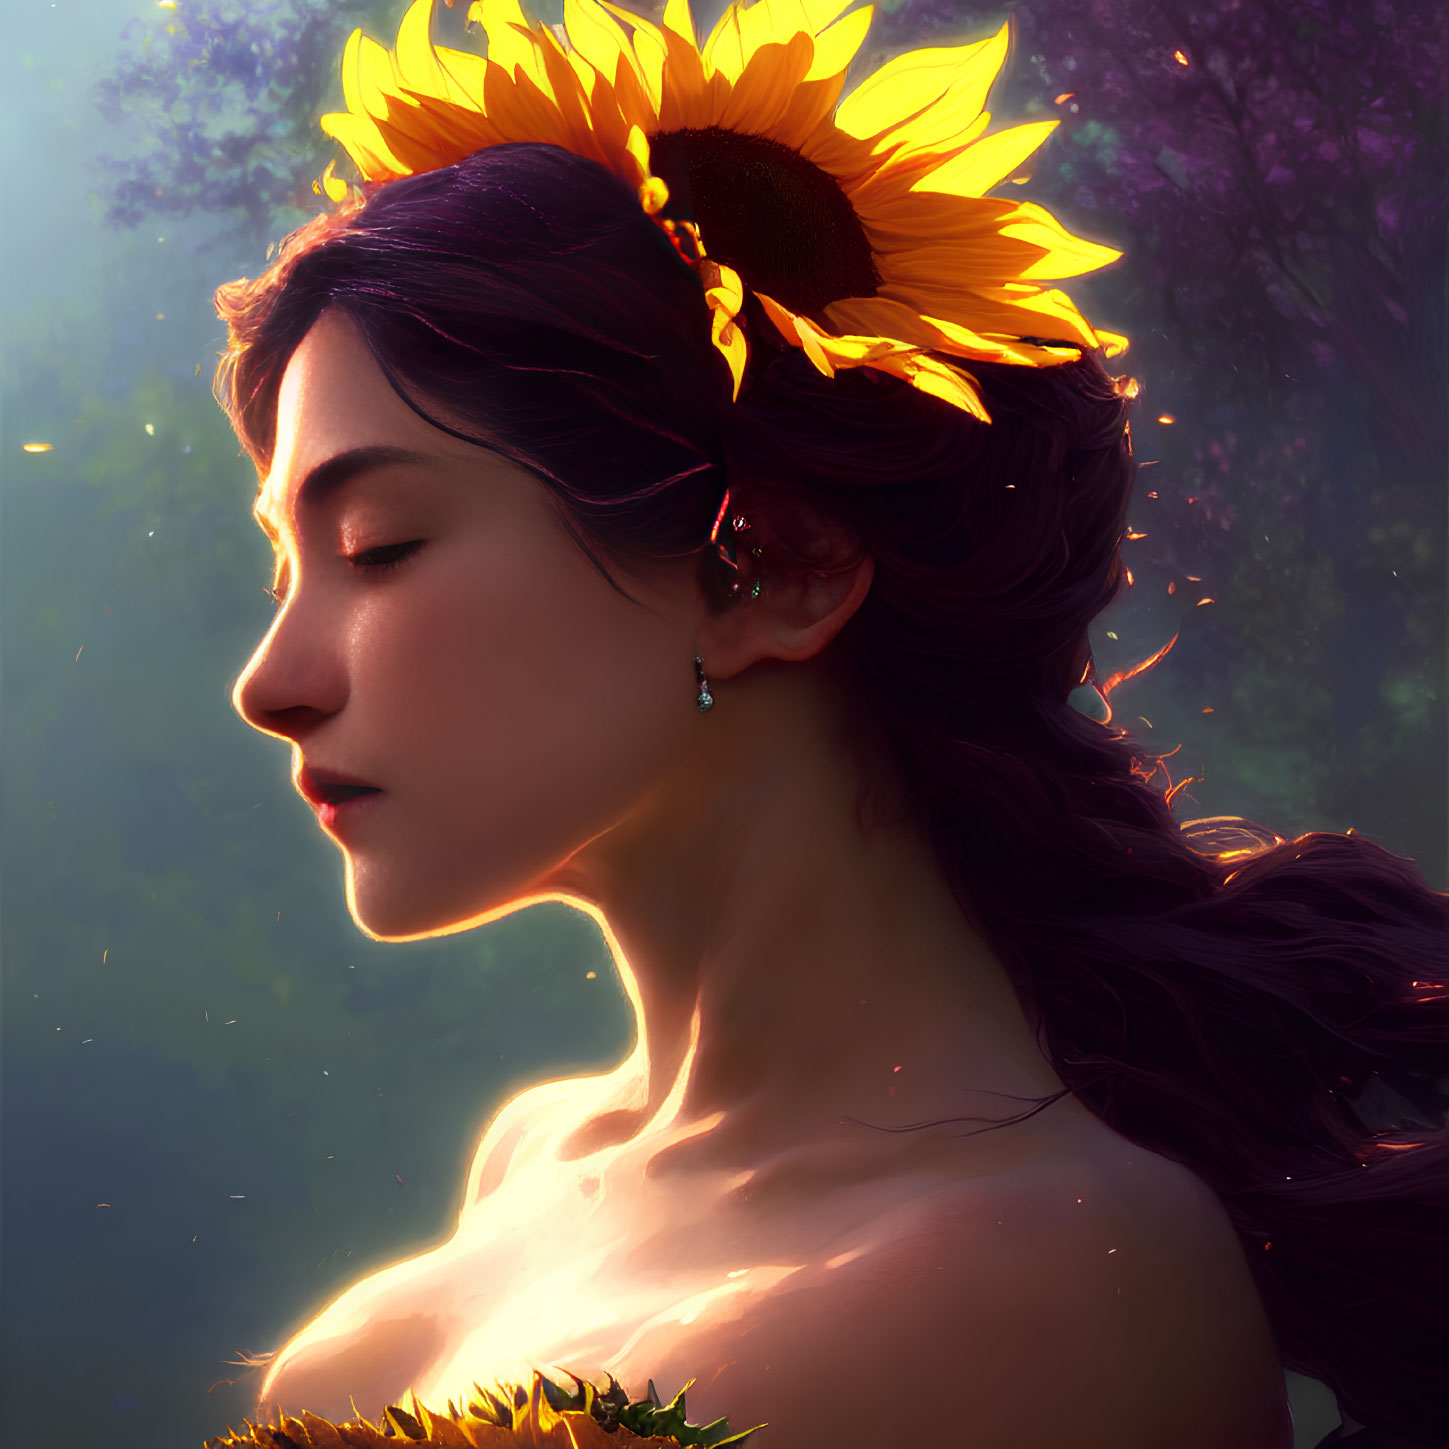 Profile of woman with sunflower in serene, sunlit setting